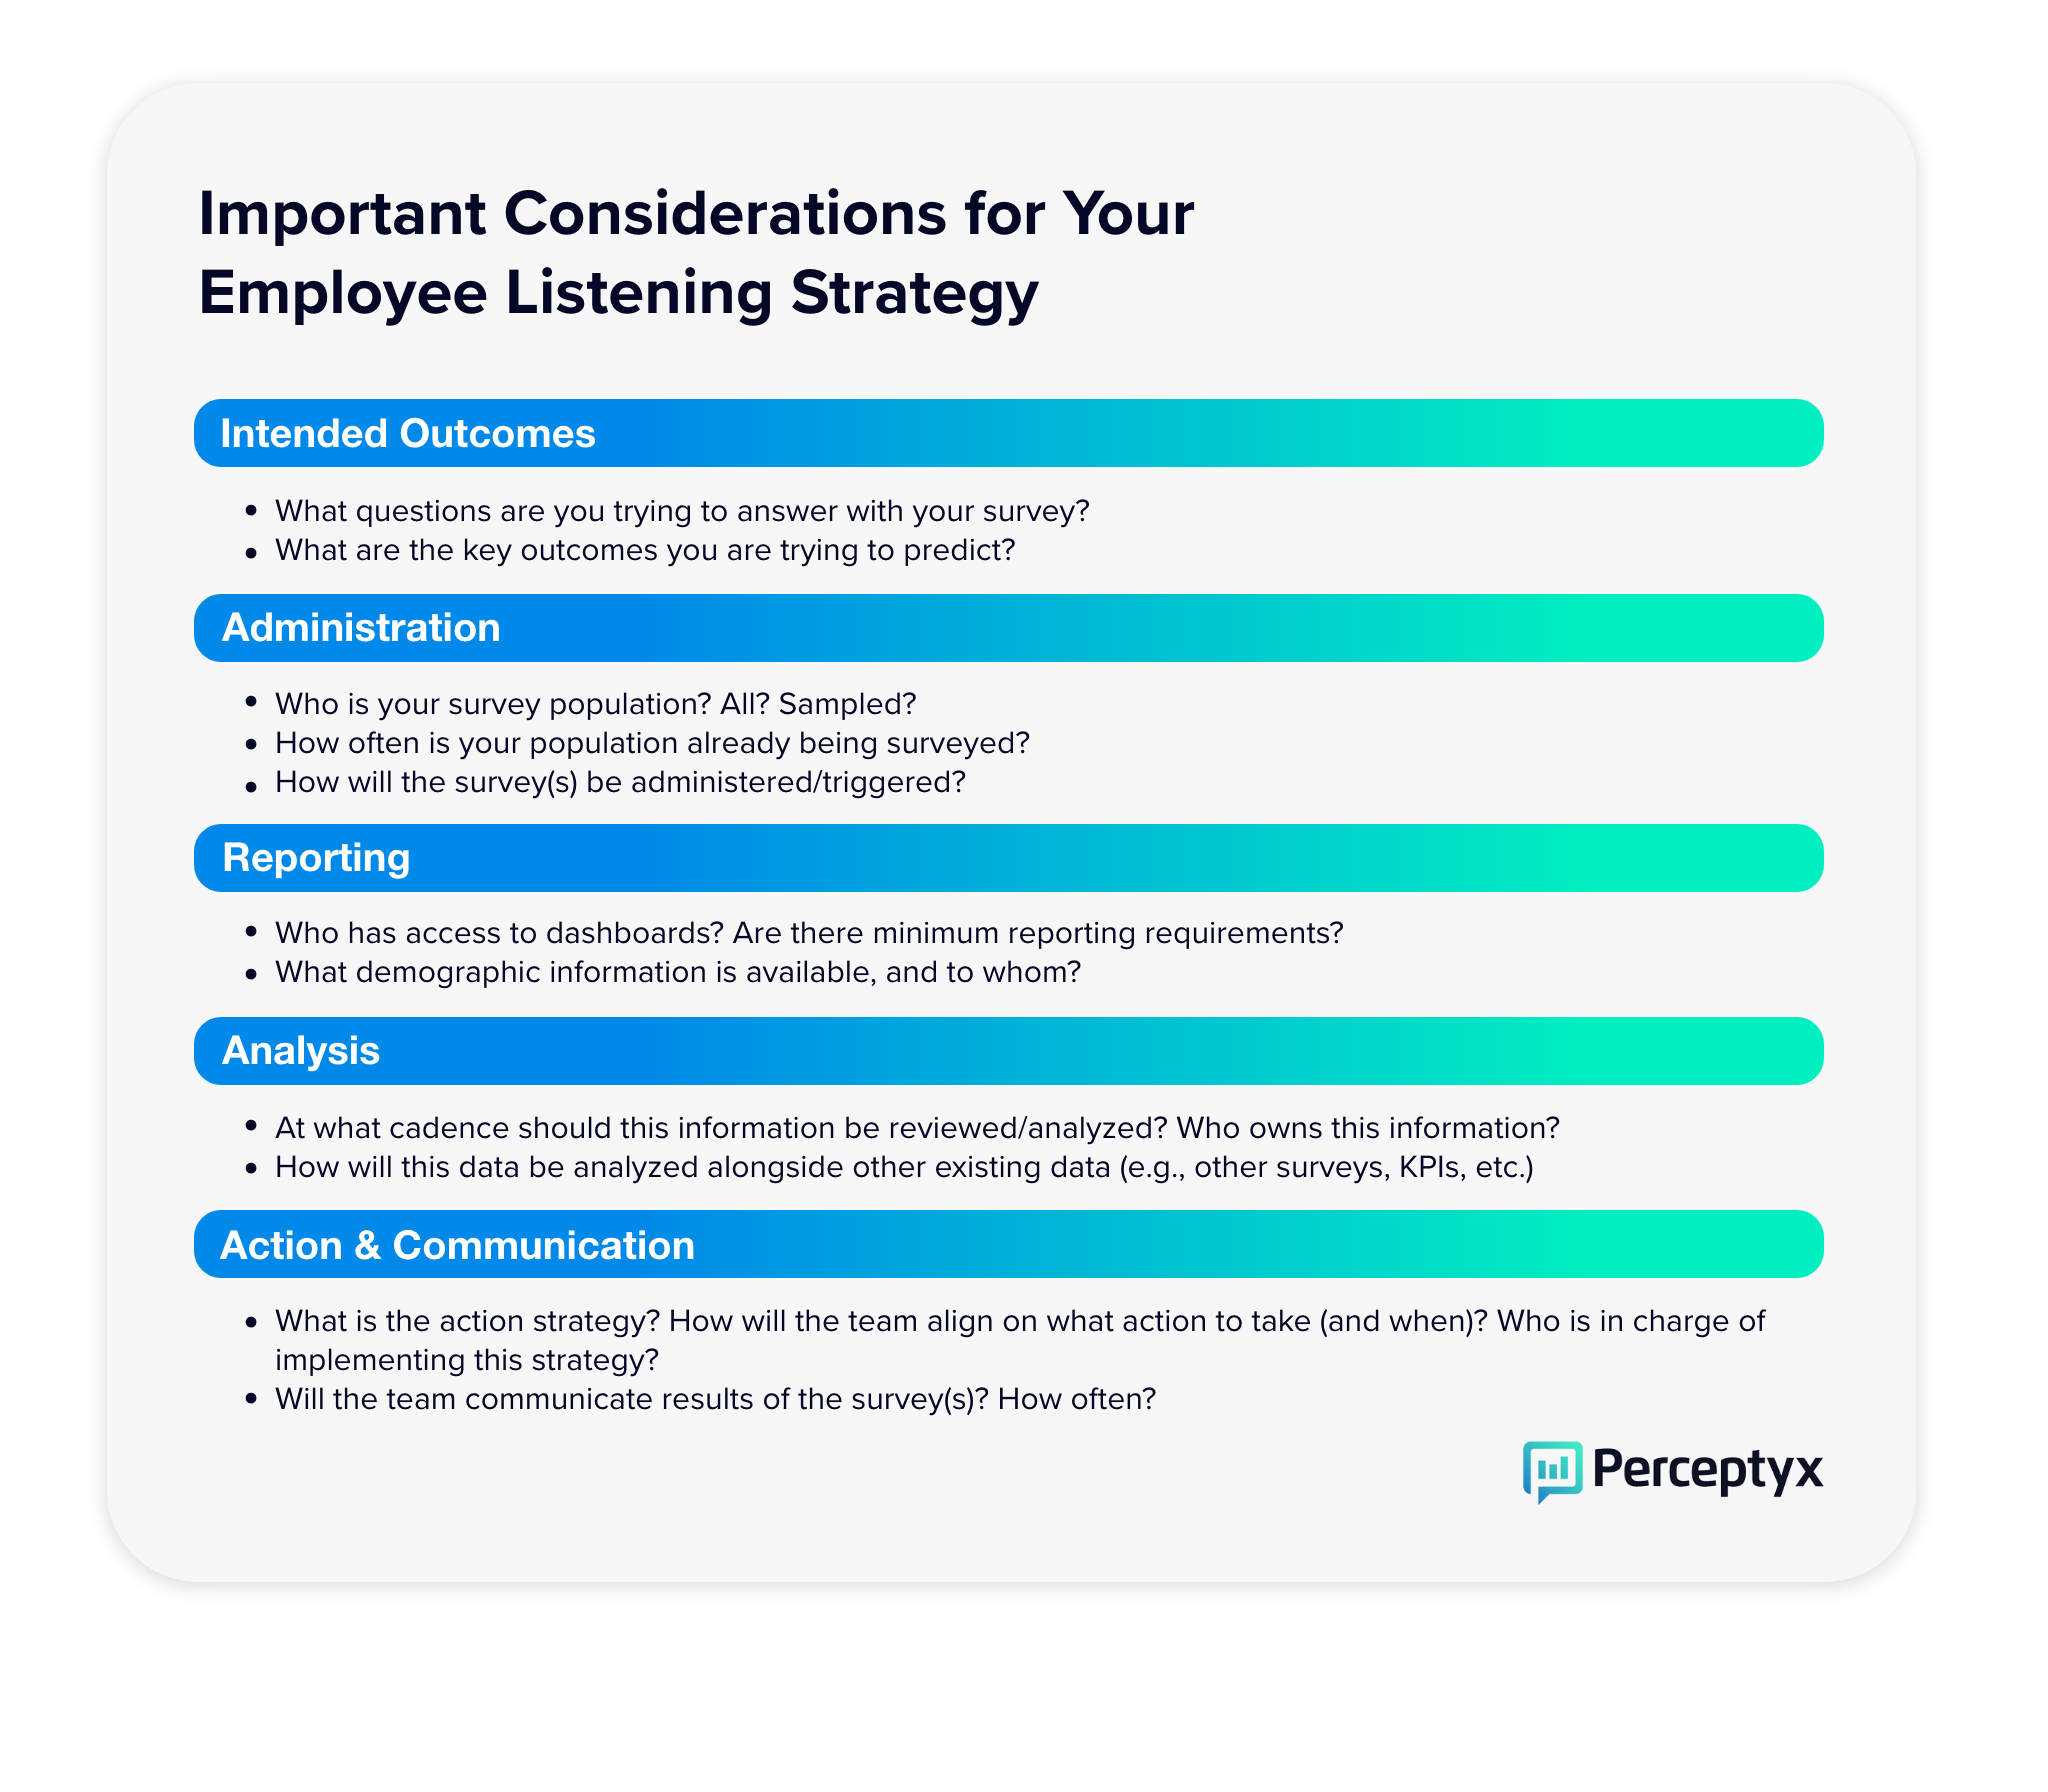 Important considerations for your employee listening strategy